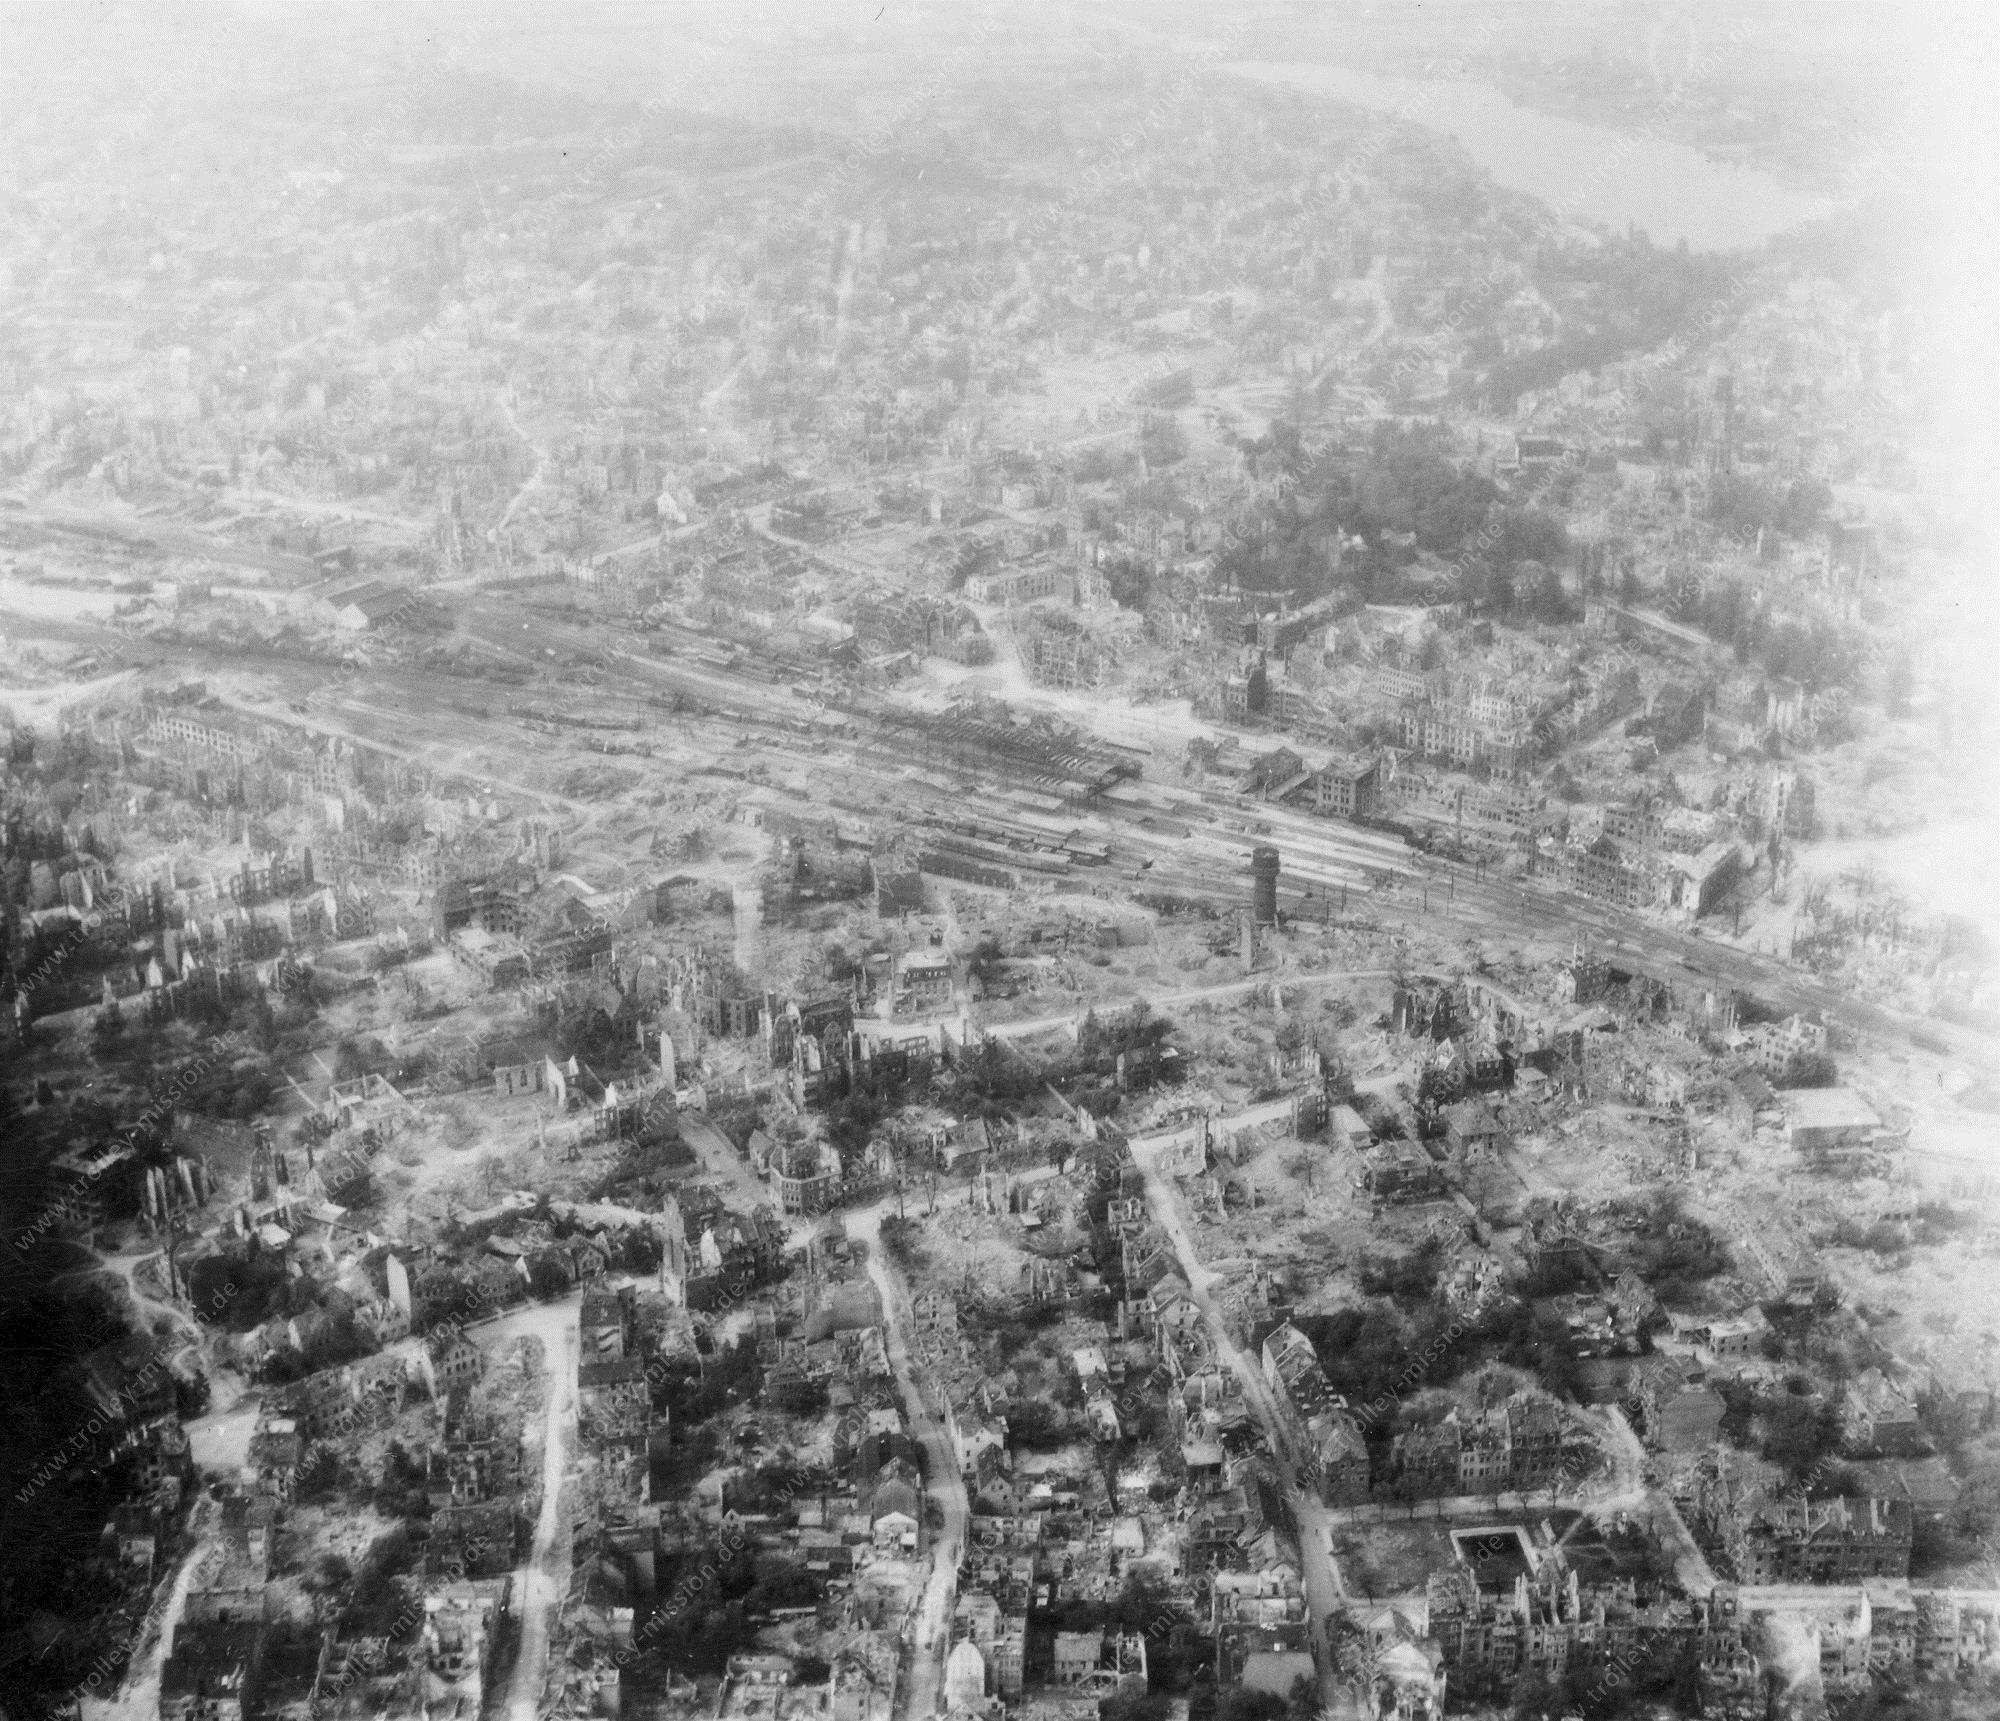 Muenster from above: Aerial view after Allied air raids in World War II